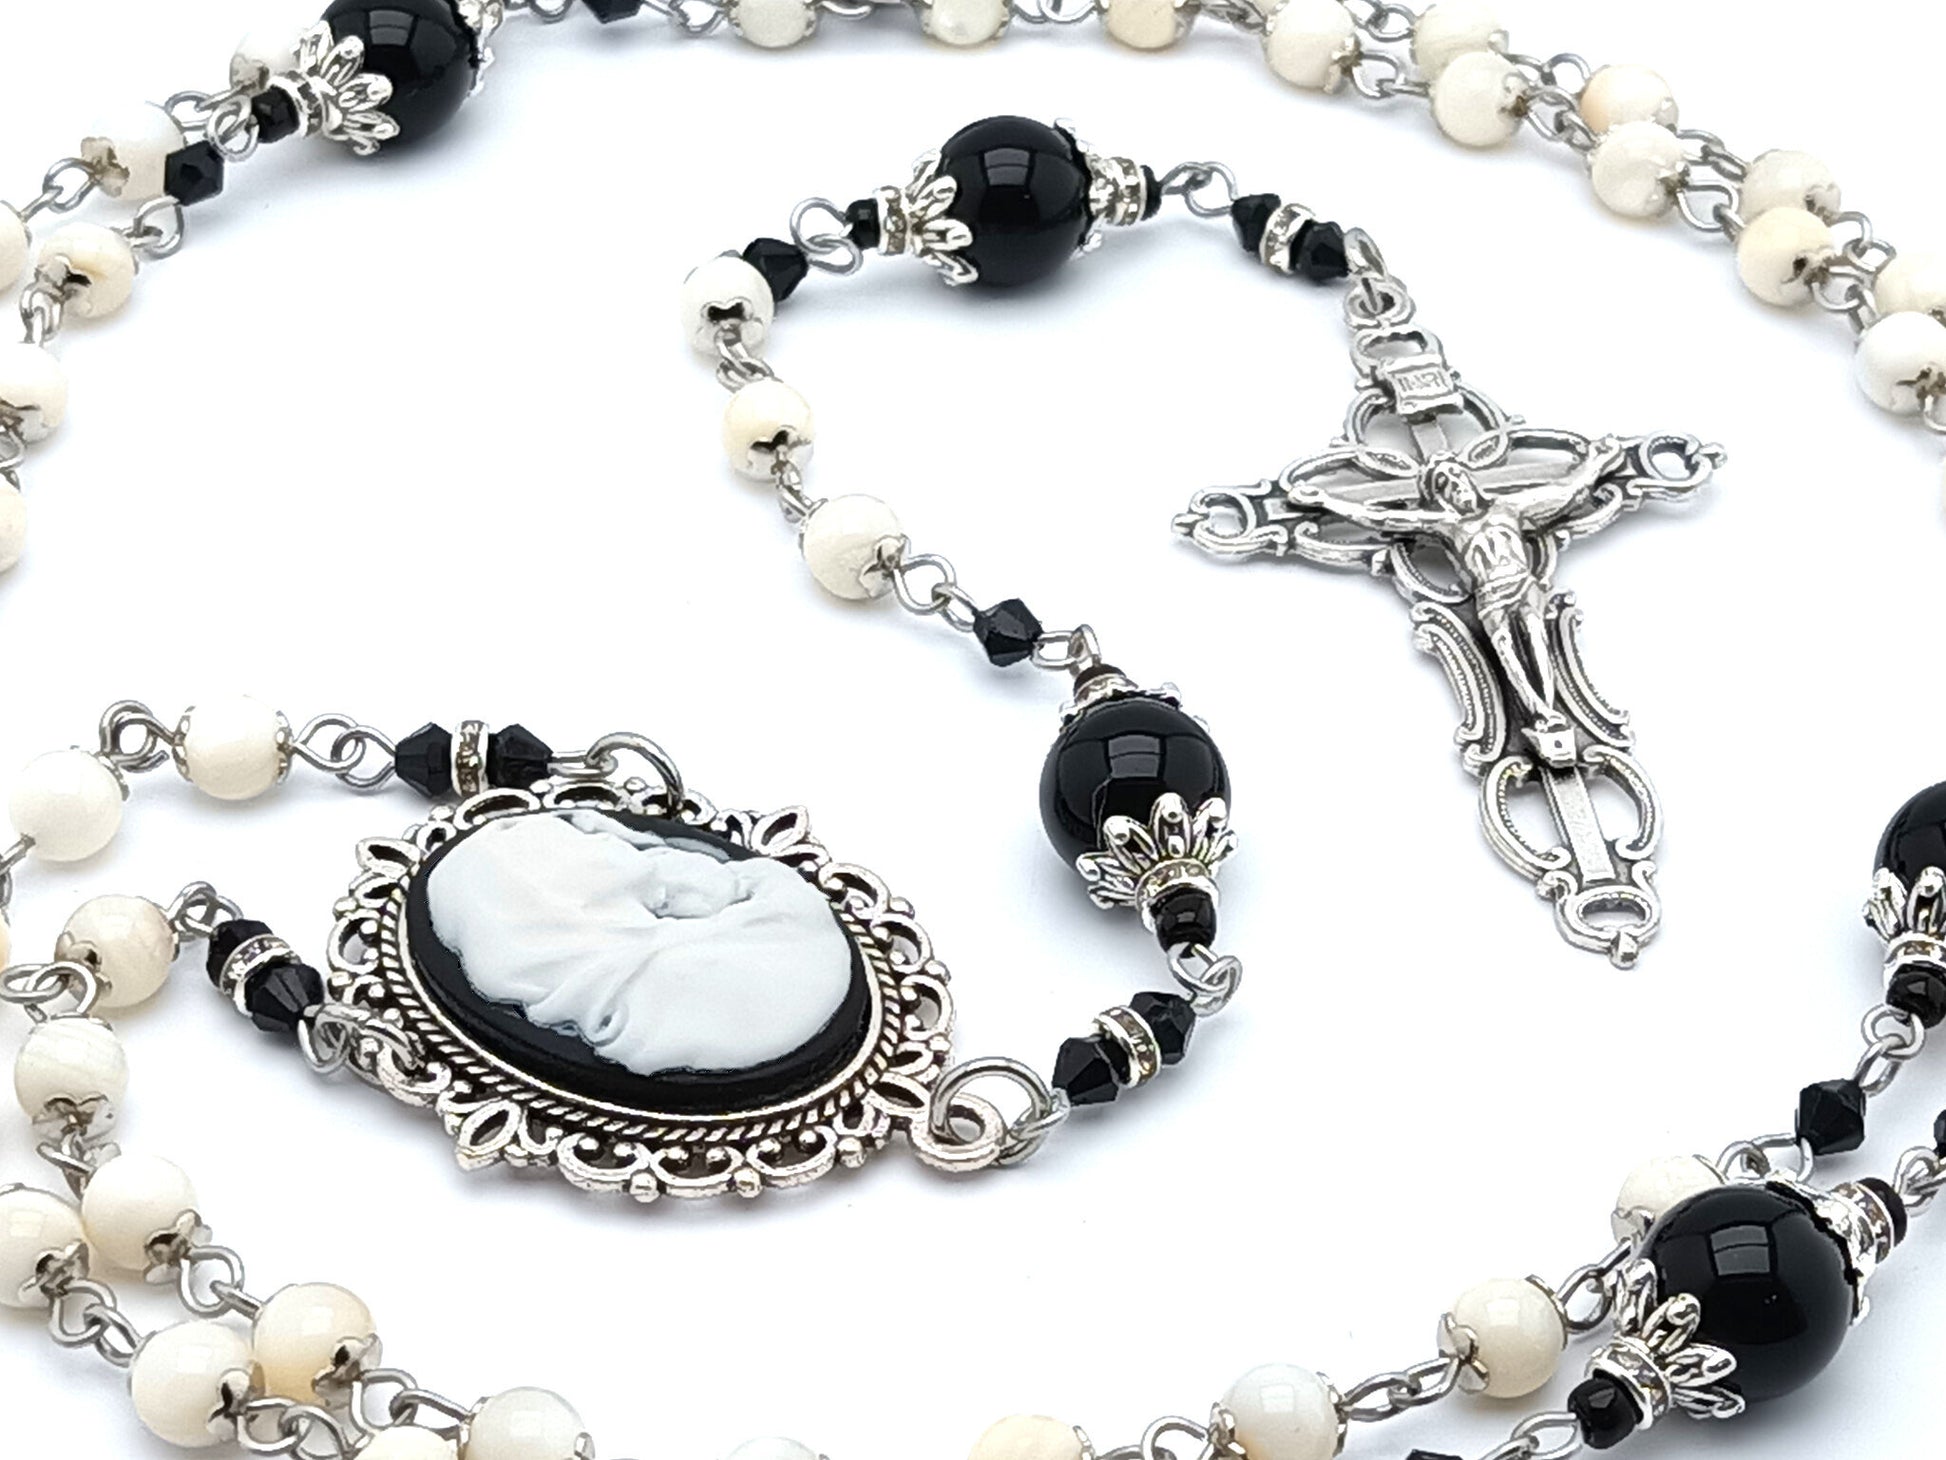 Madonna and child cameo unique rosary beads with mother of pearl and onyx rosary beads with filigree crucifix.